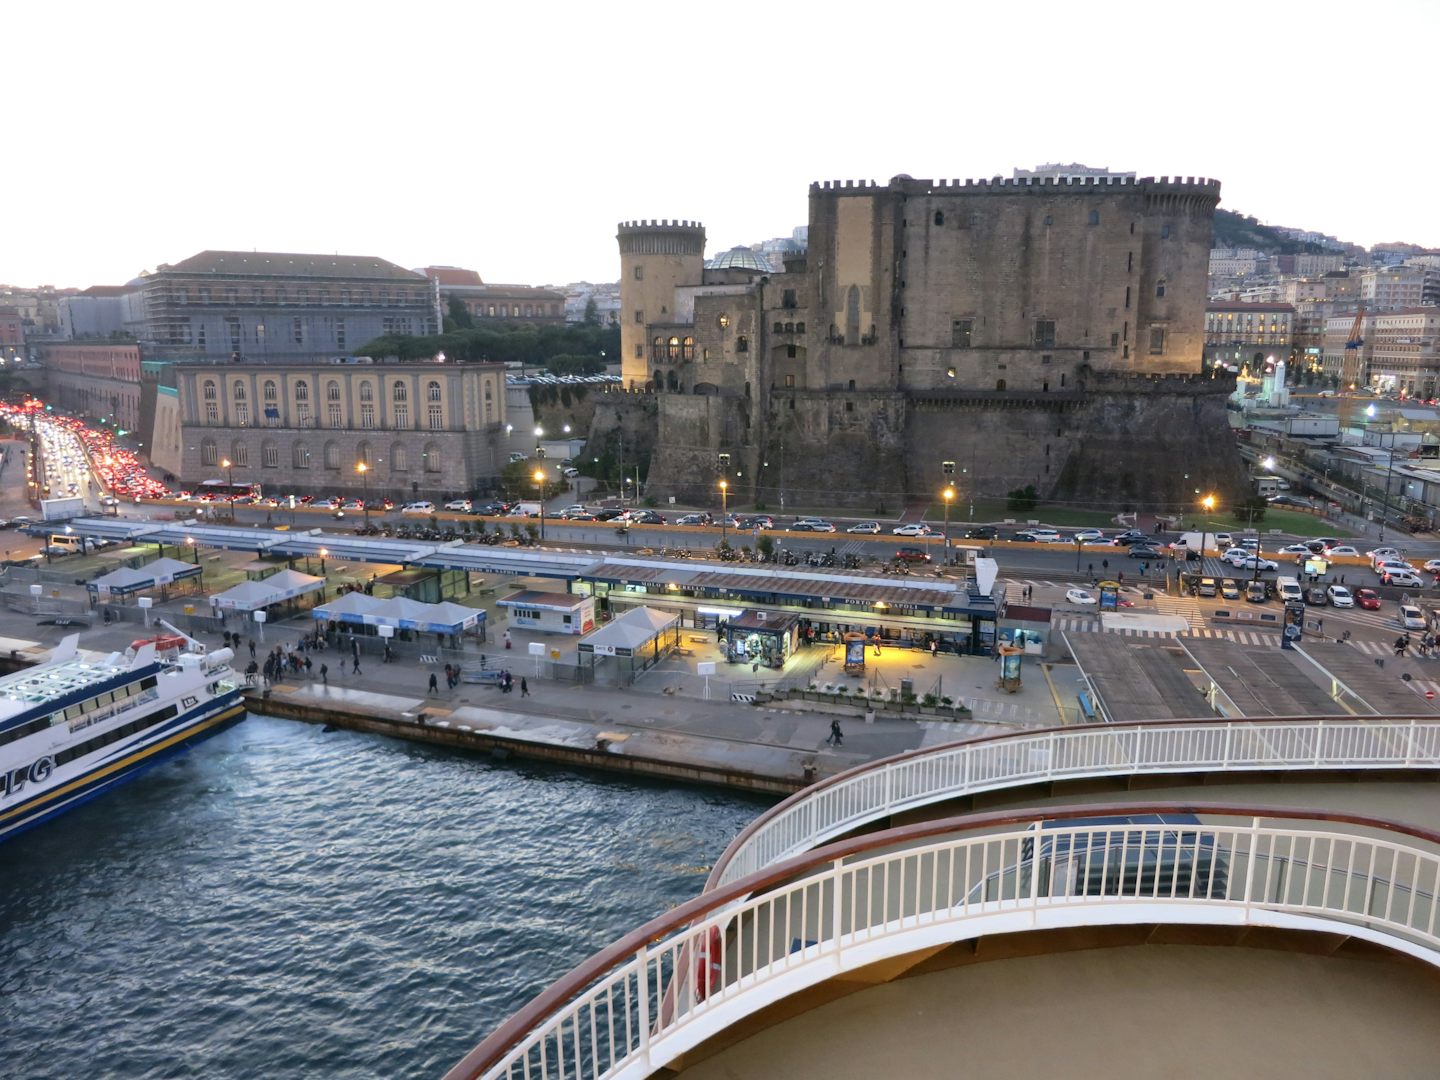 View from the Raffle's Terrace in Naples, Italy